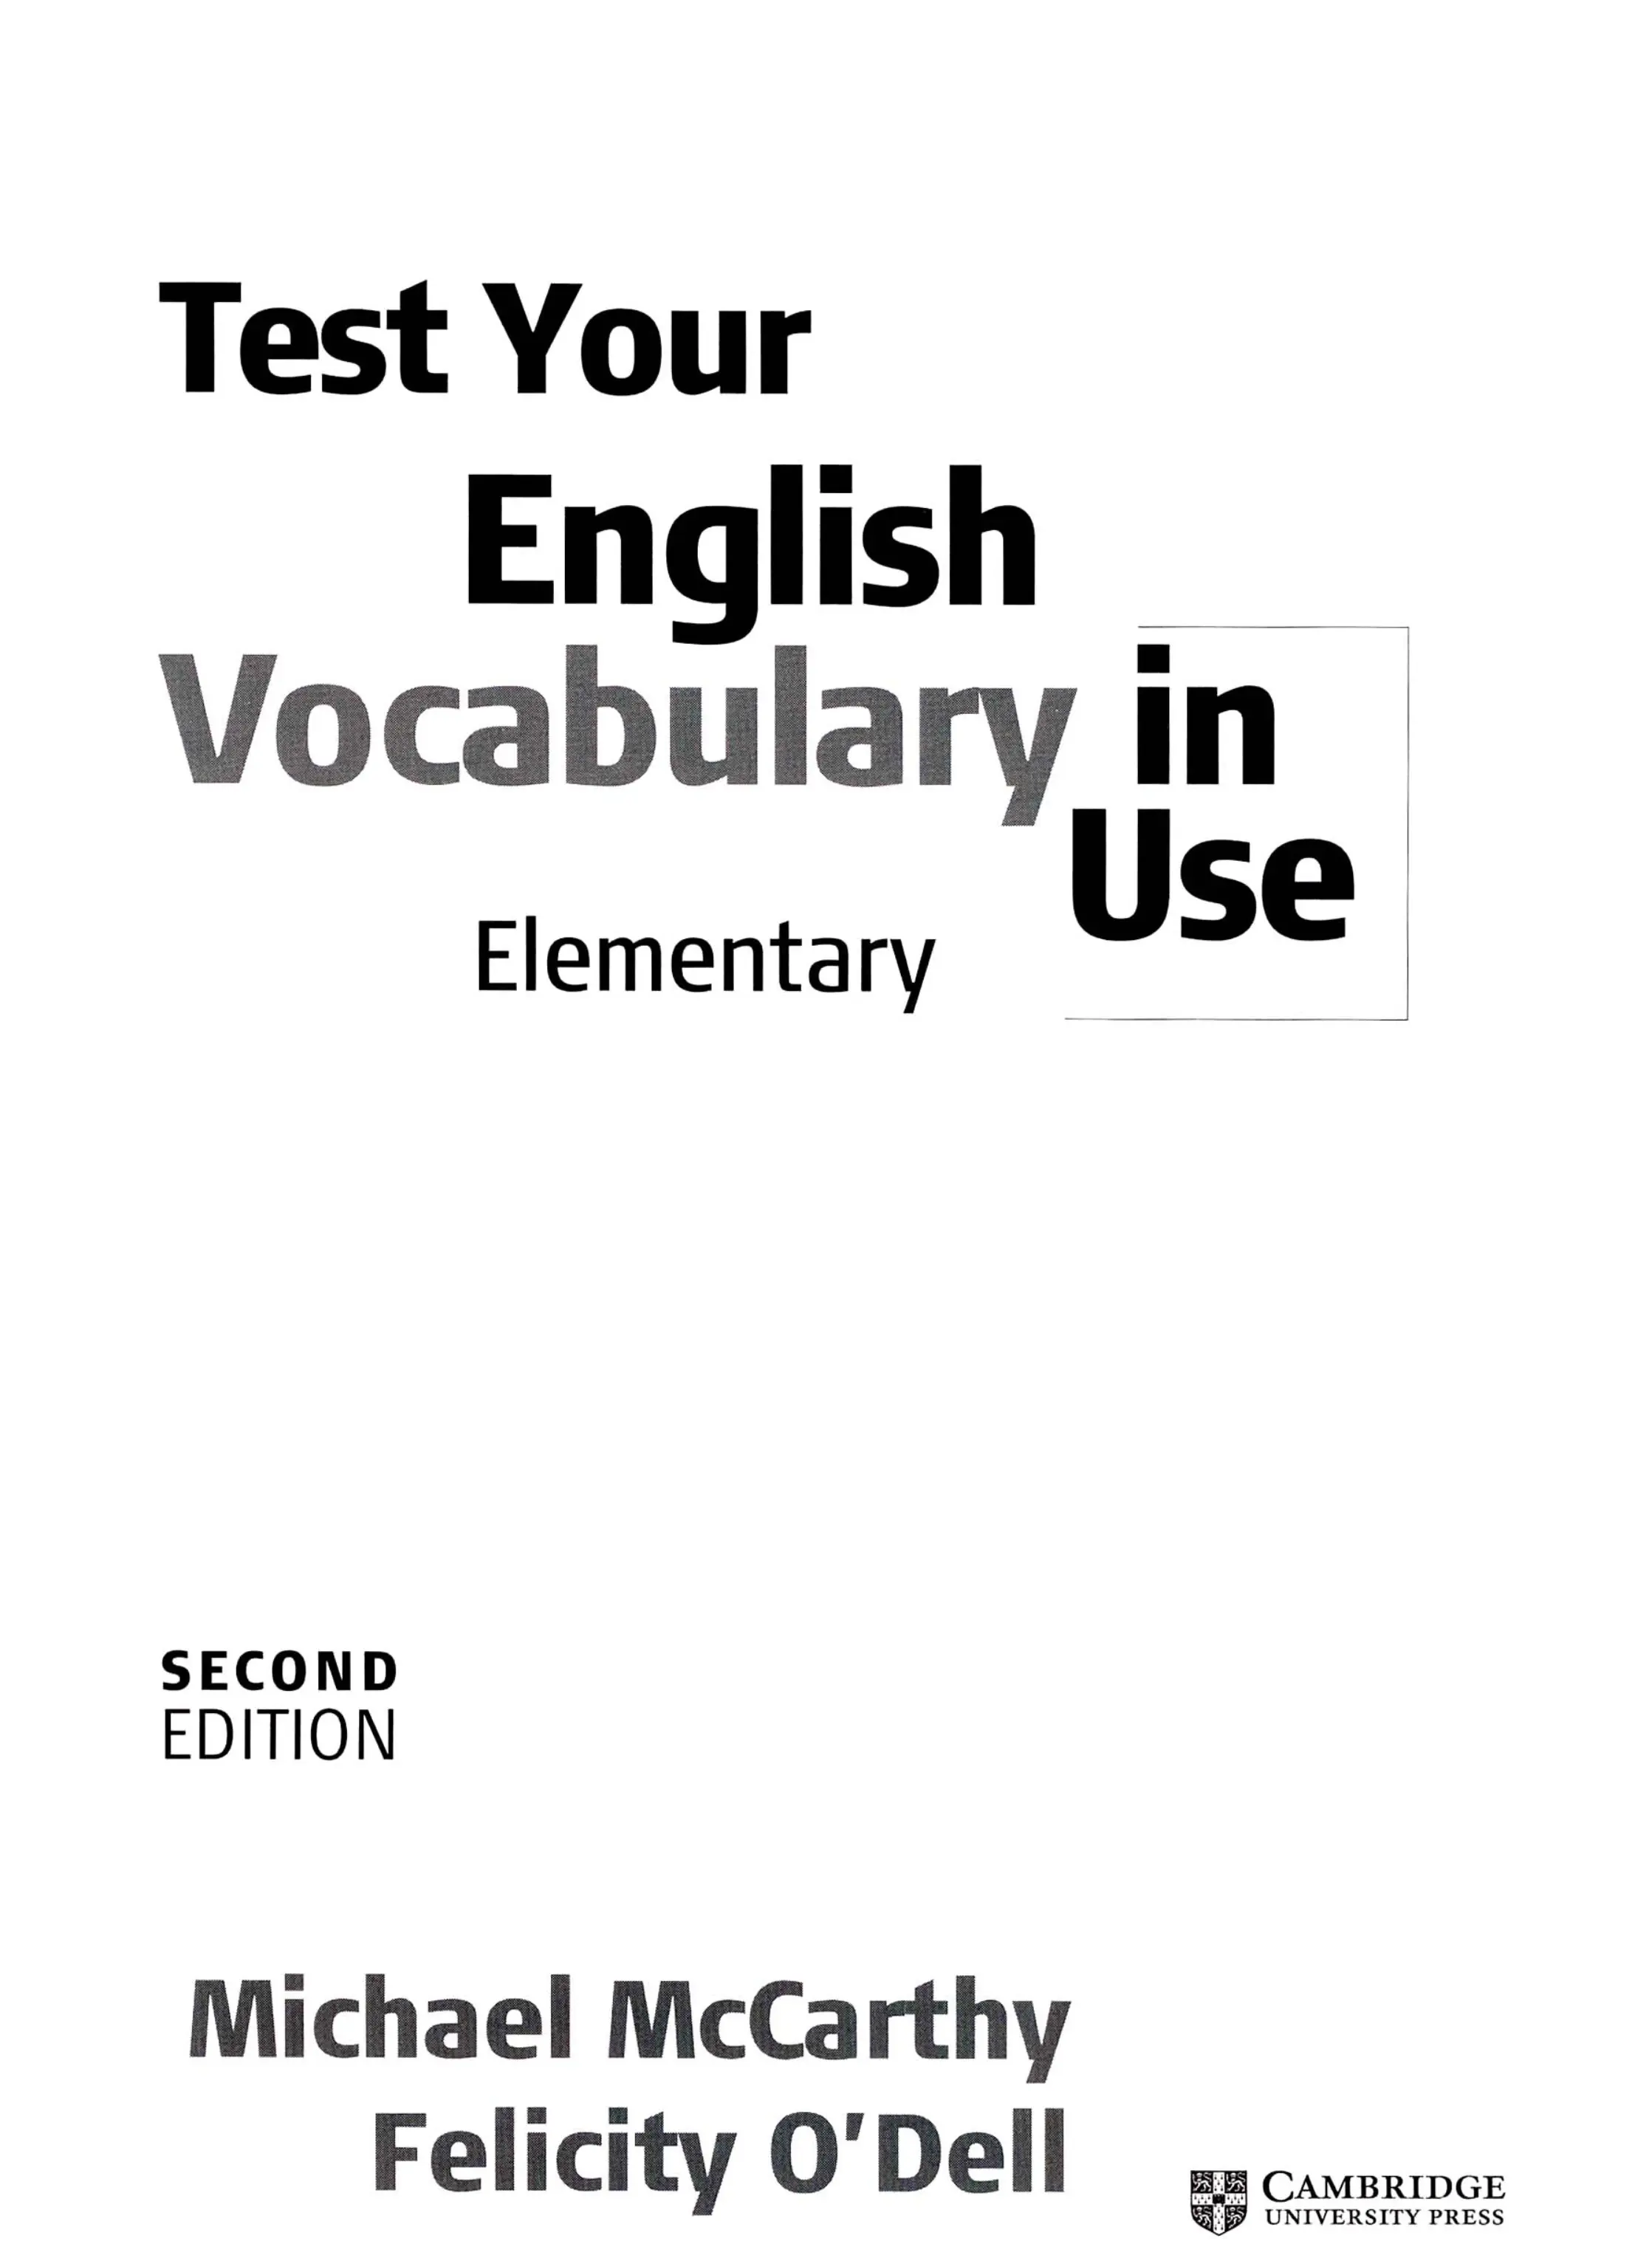 Test Your English Vocabulary In Use Elementary_002